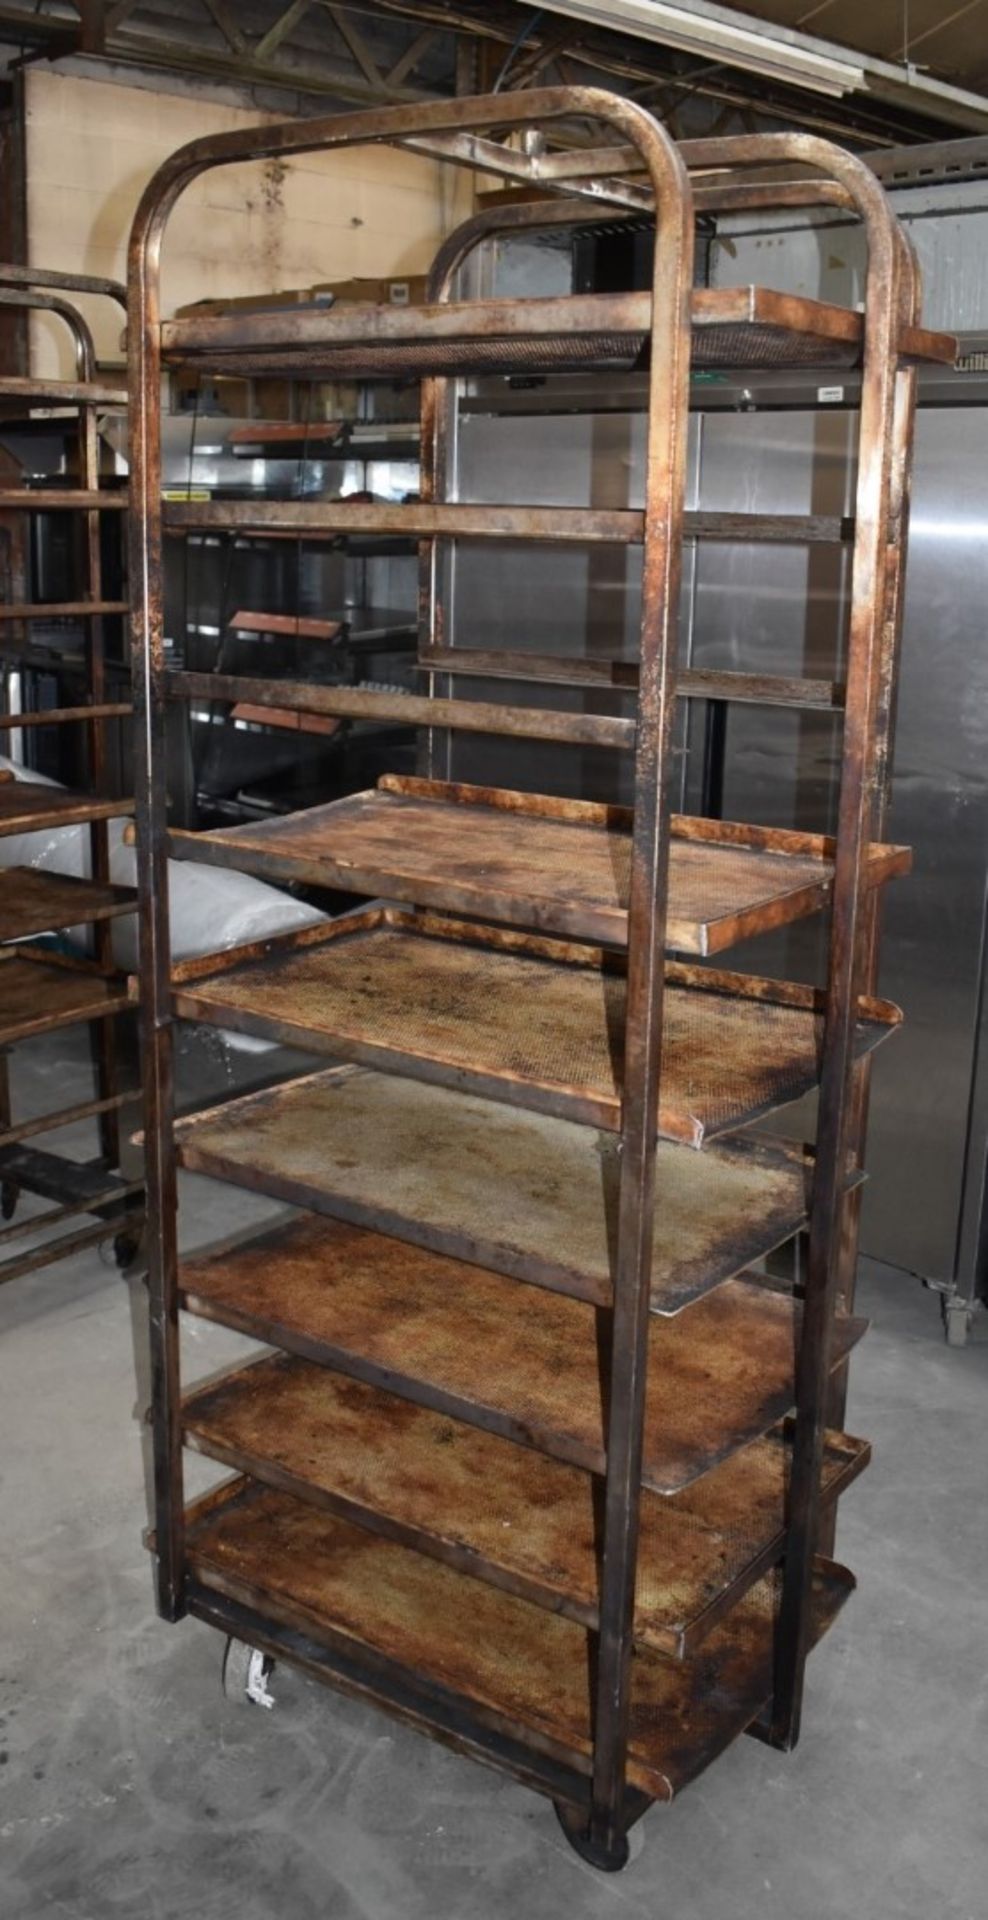 1 x Upright Mobile Baking Rack With Six Trays - Image 3 of 3